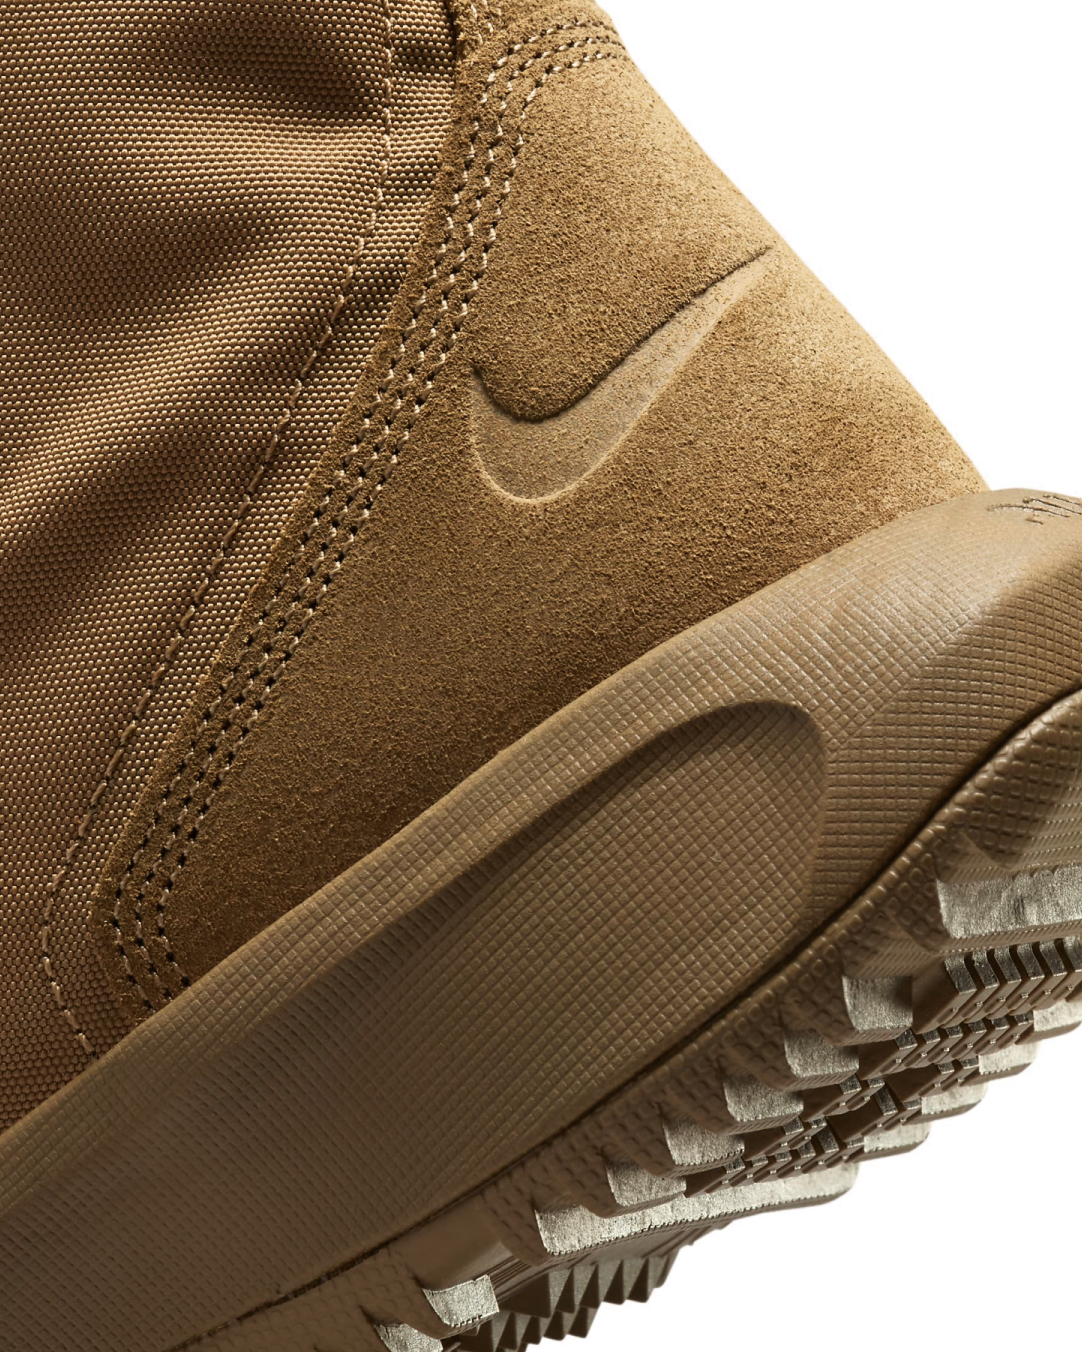 Nike SFB B2 Coyote Brown Leather Military Boots